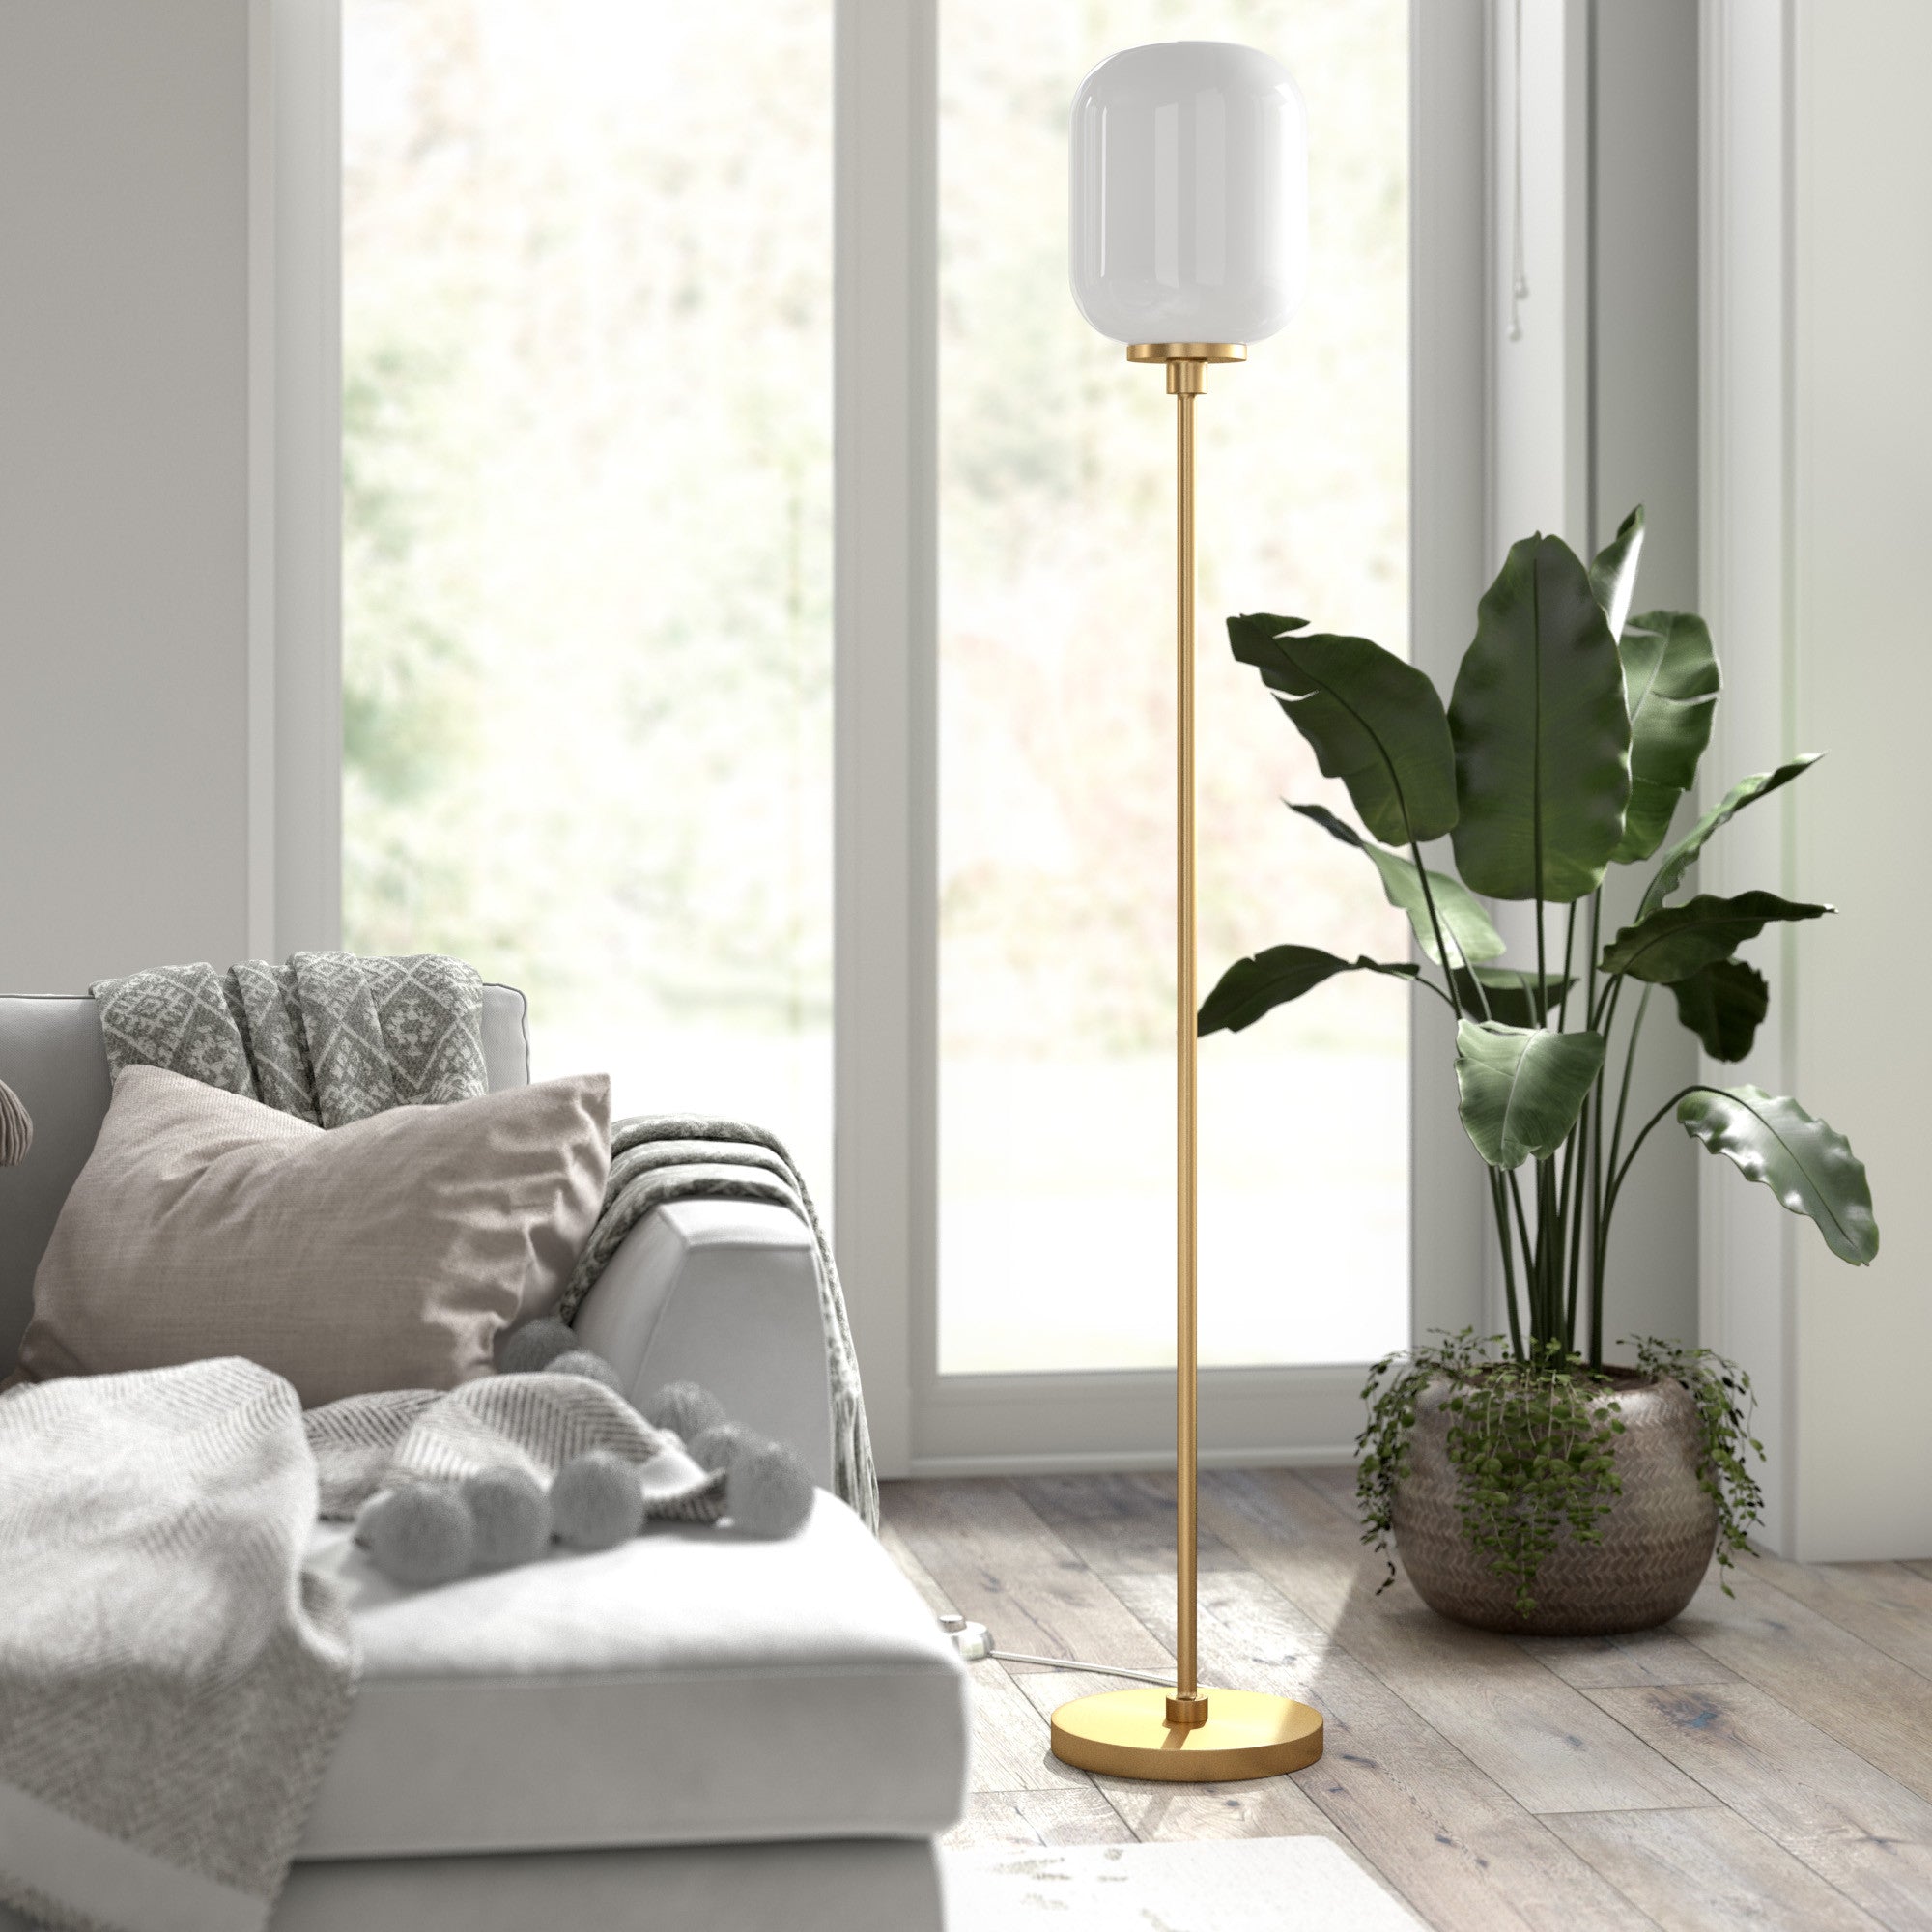 69" Brass Novelty Floor Lamp With White Frosted Glass Globe Shade